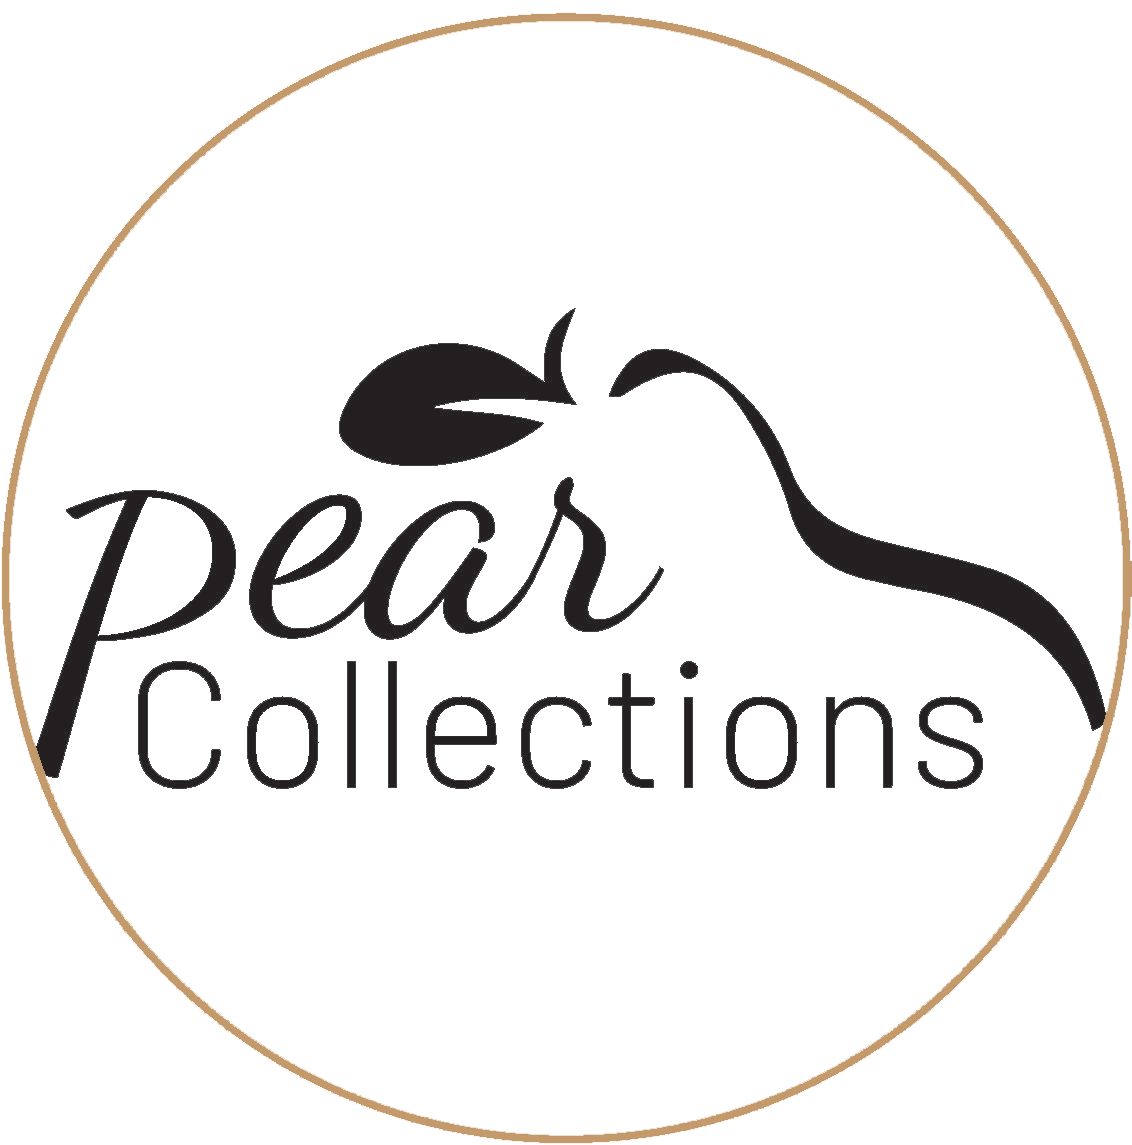 Winner Image - Pear Collections